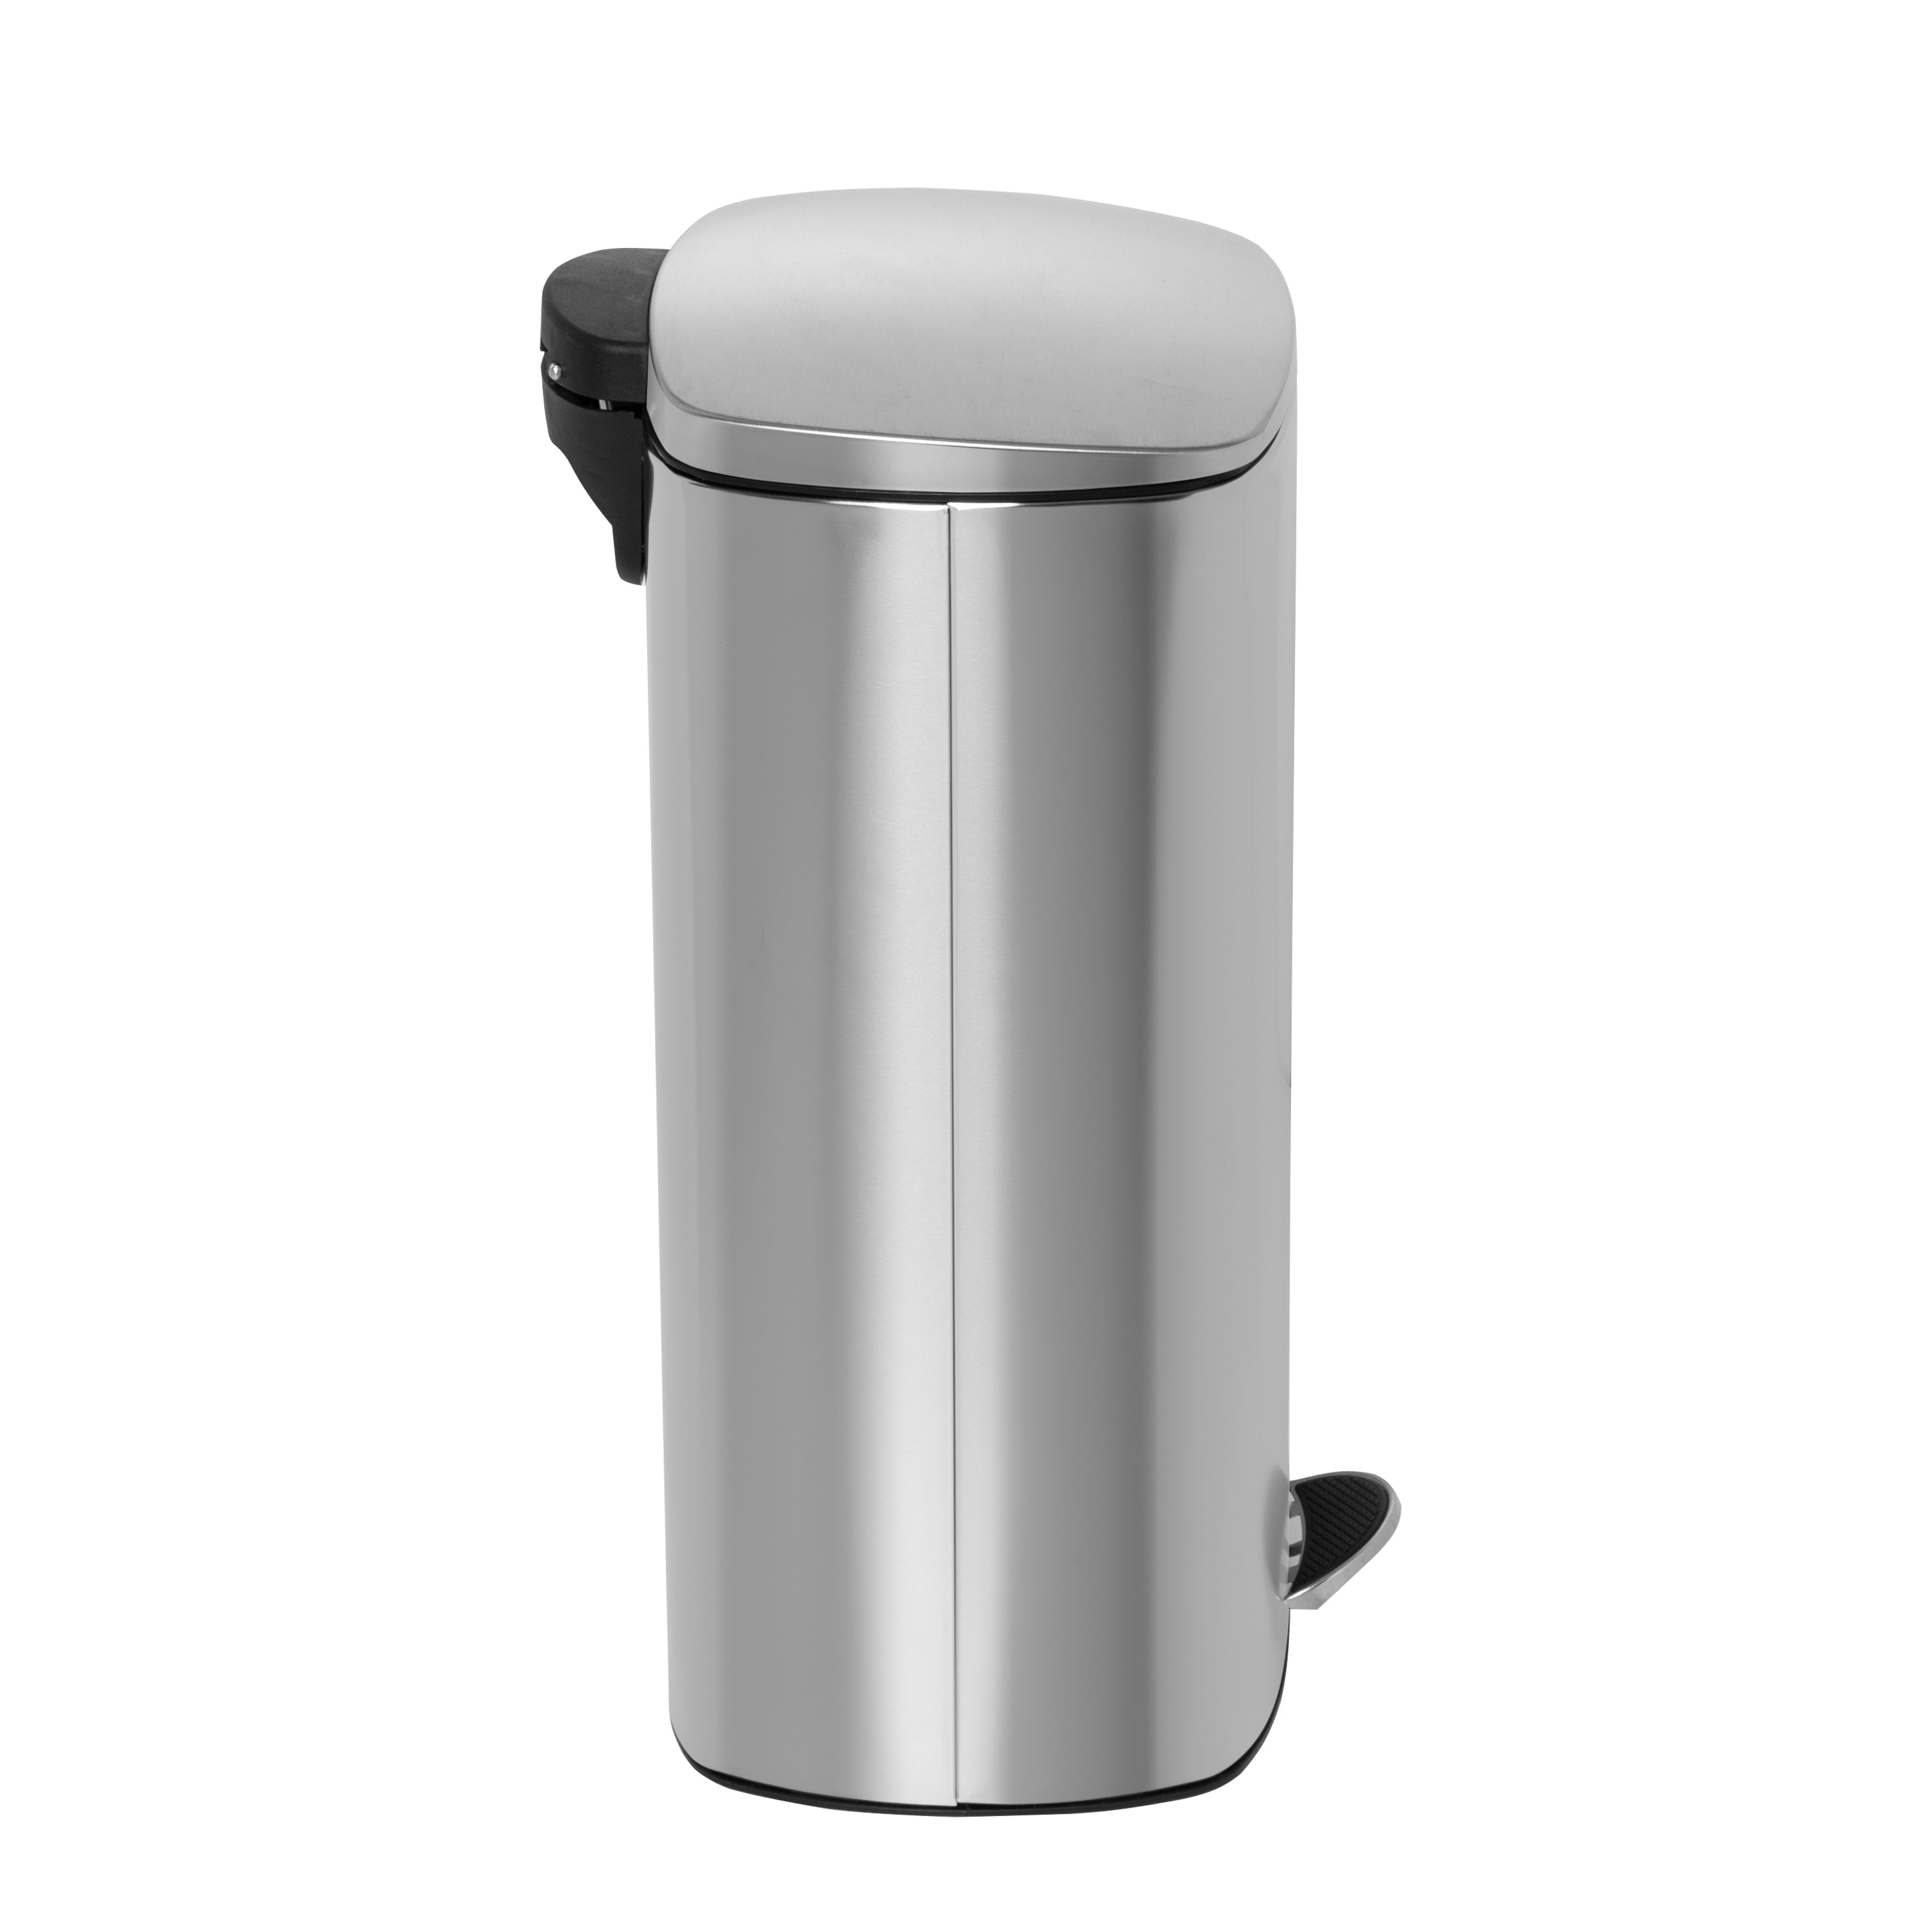 Silver 40L Tall Slim Stainless Steel Step Trash Can with Lid